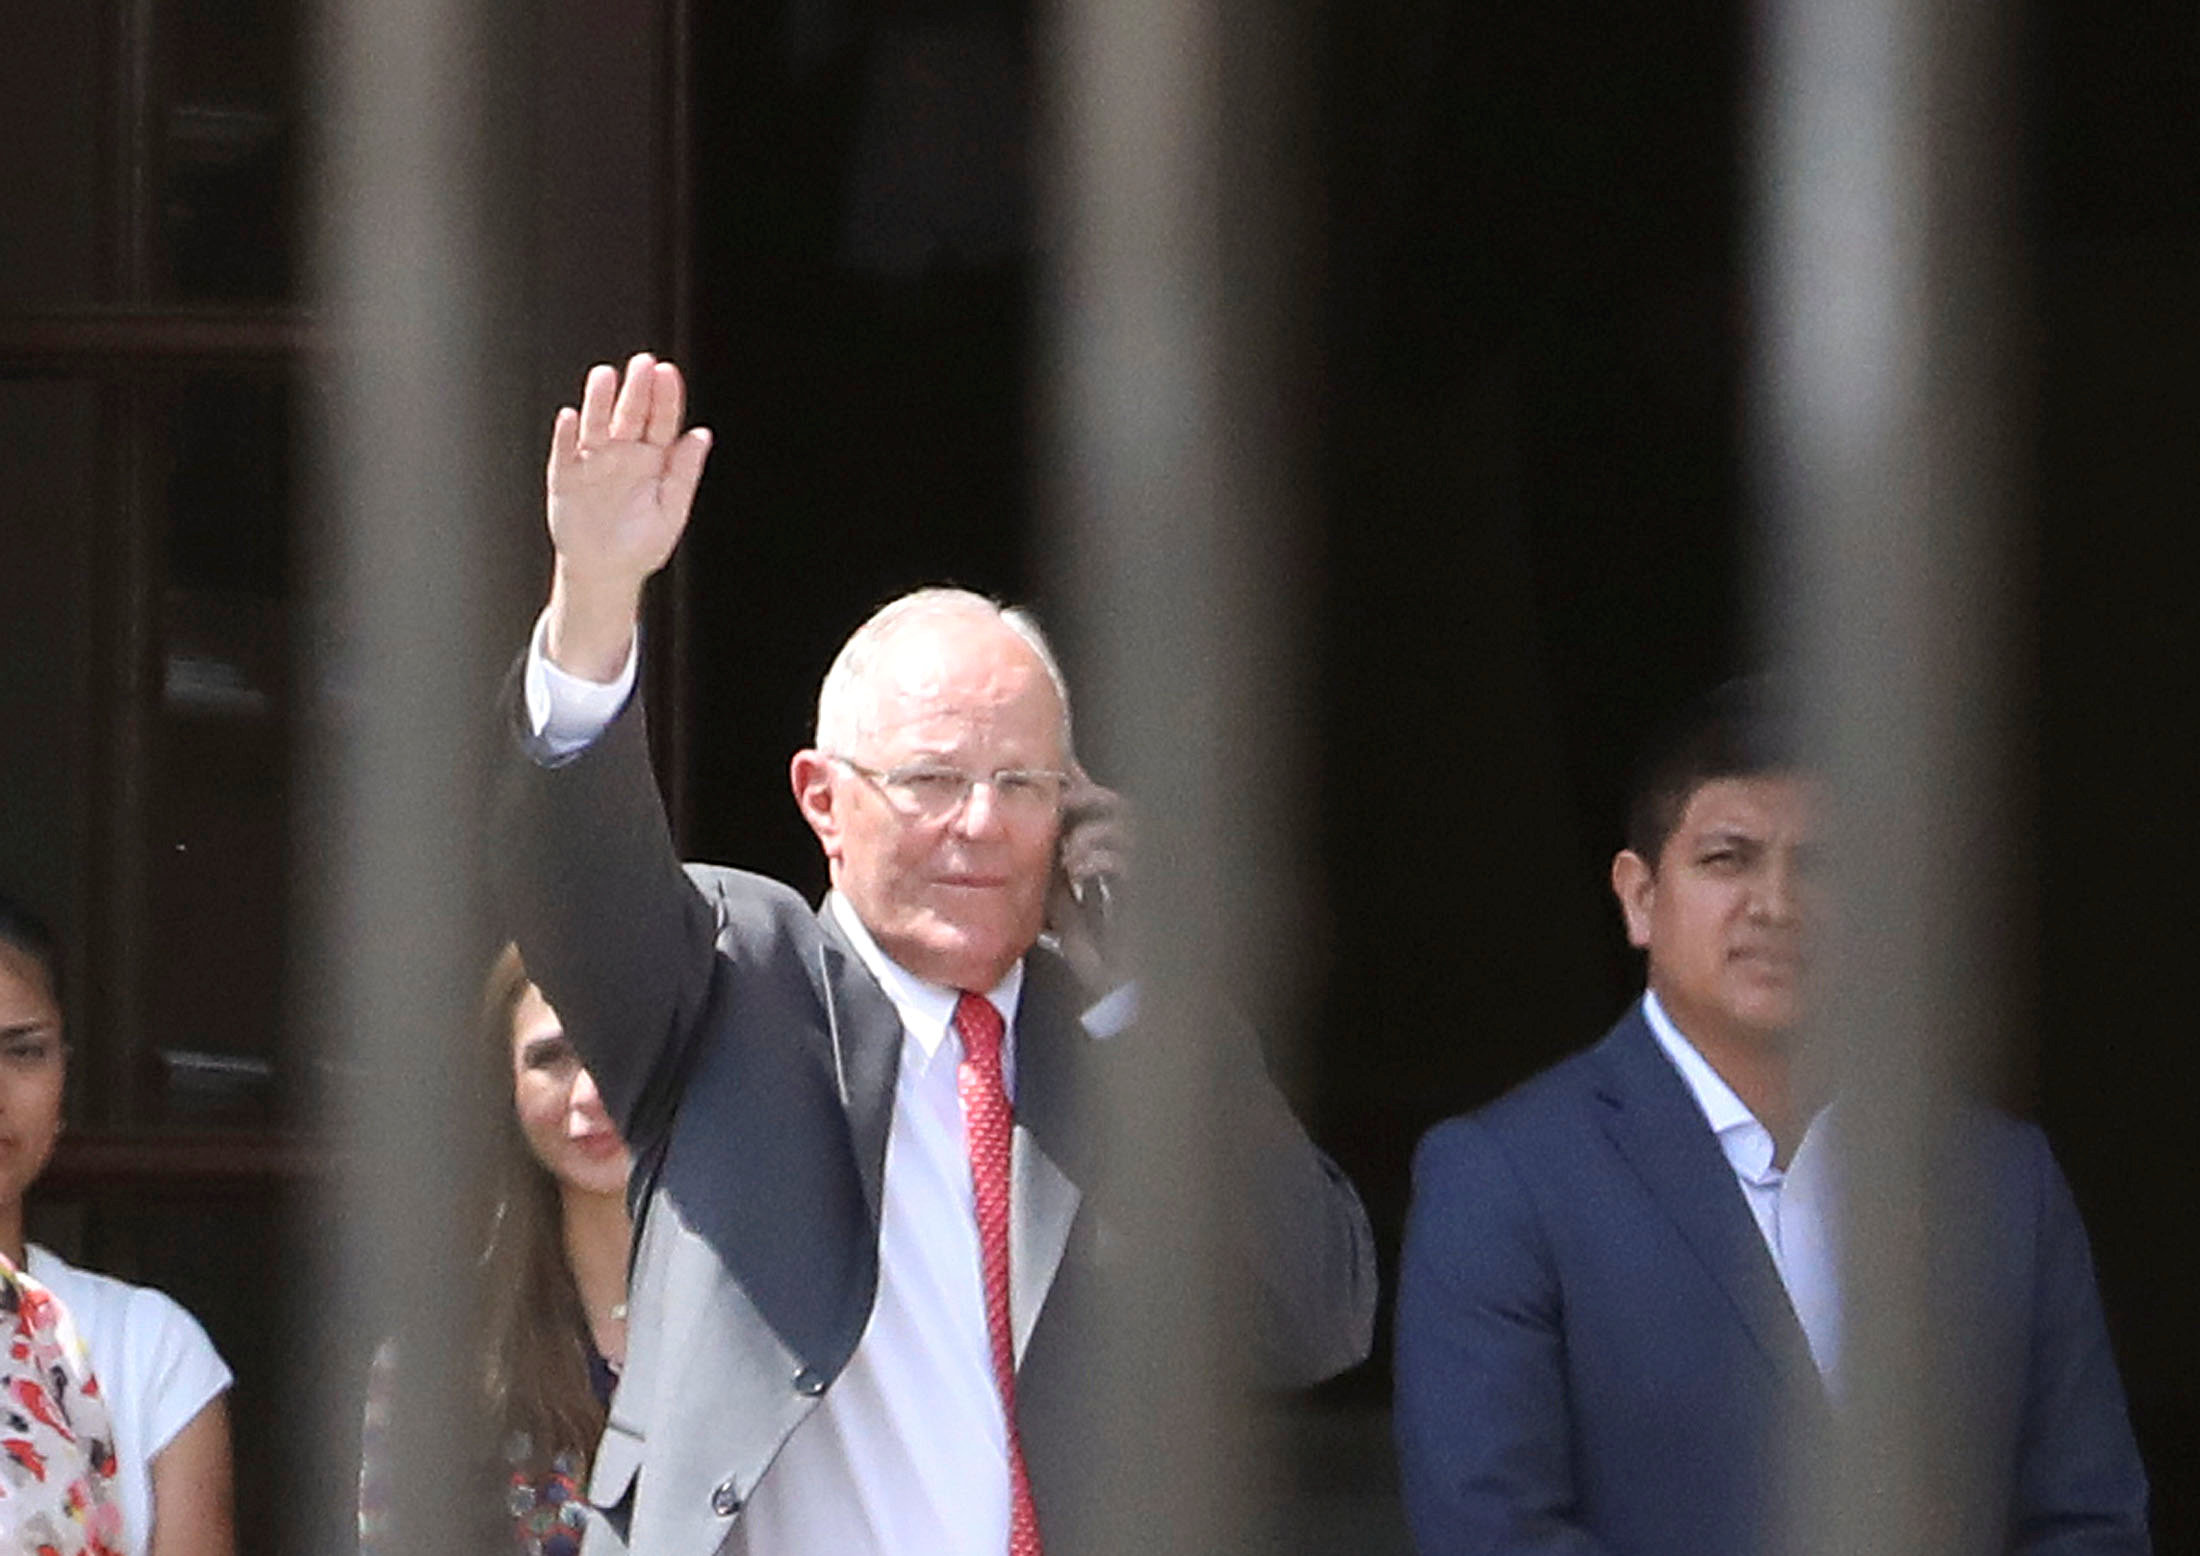 Peru's President Pedro Pablo Kuczynski leaves Government Palace after presenting his resignation to Congress in Lima, Peru March 21, 2018.